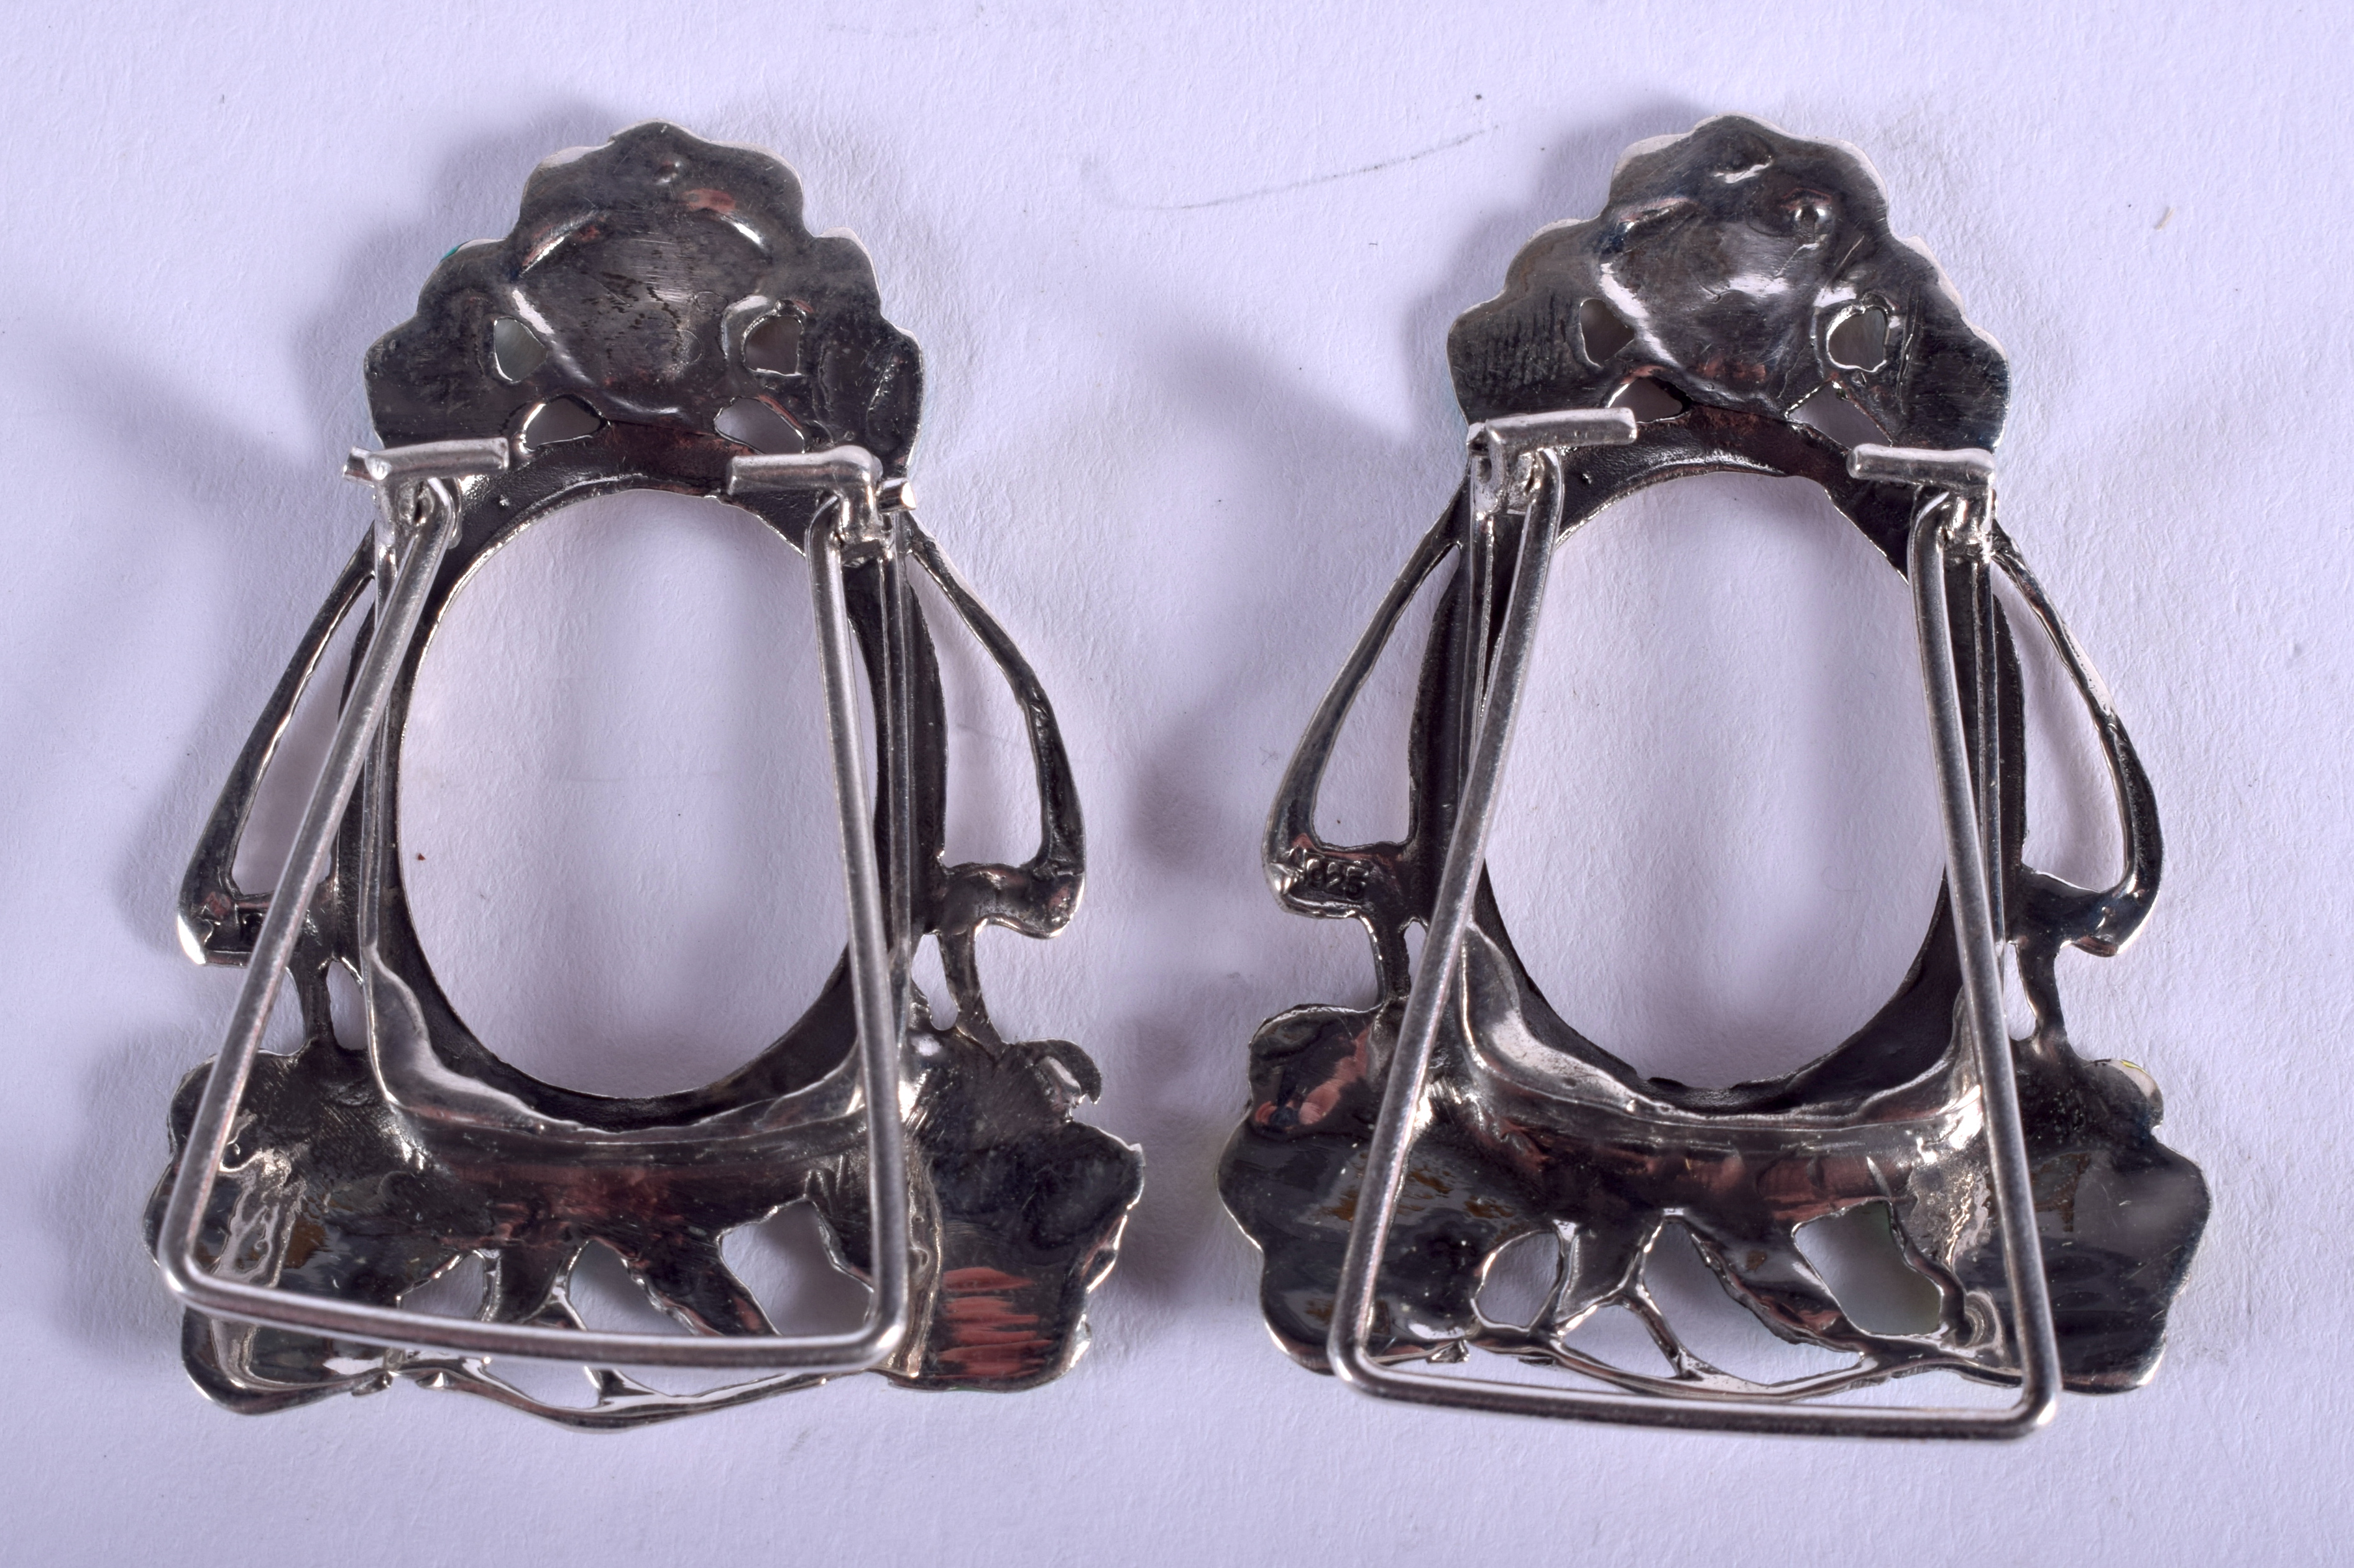 A PAIR OF CONTINENTAL SILVER AND ENAMEL FRAMES. 13 grams. 4 cm x 3 cm. - Image 2 of 2